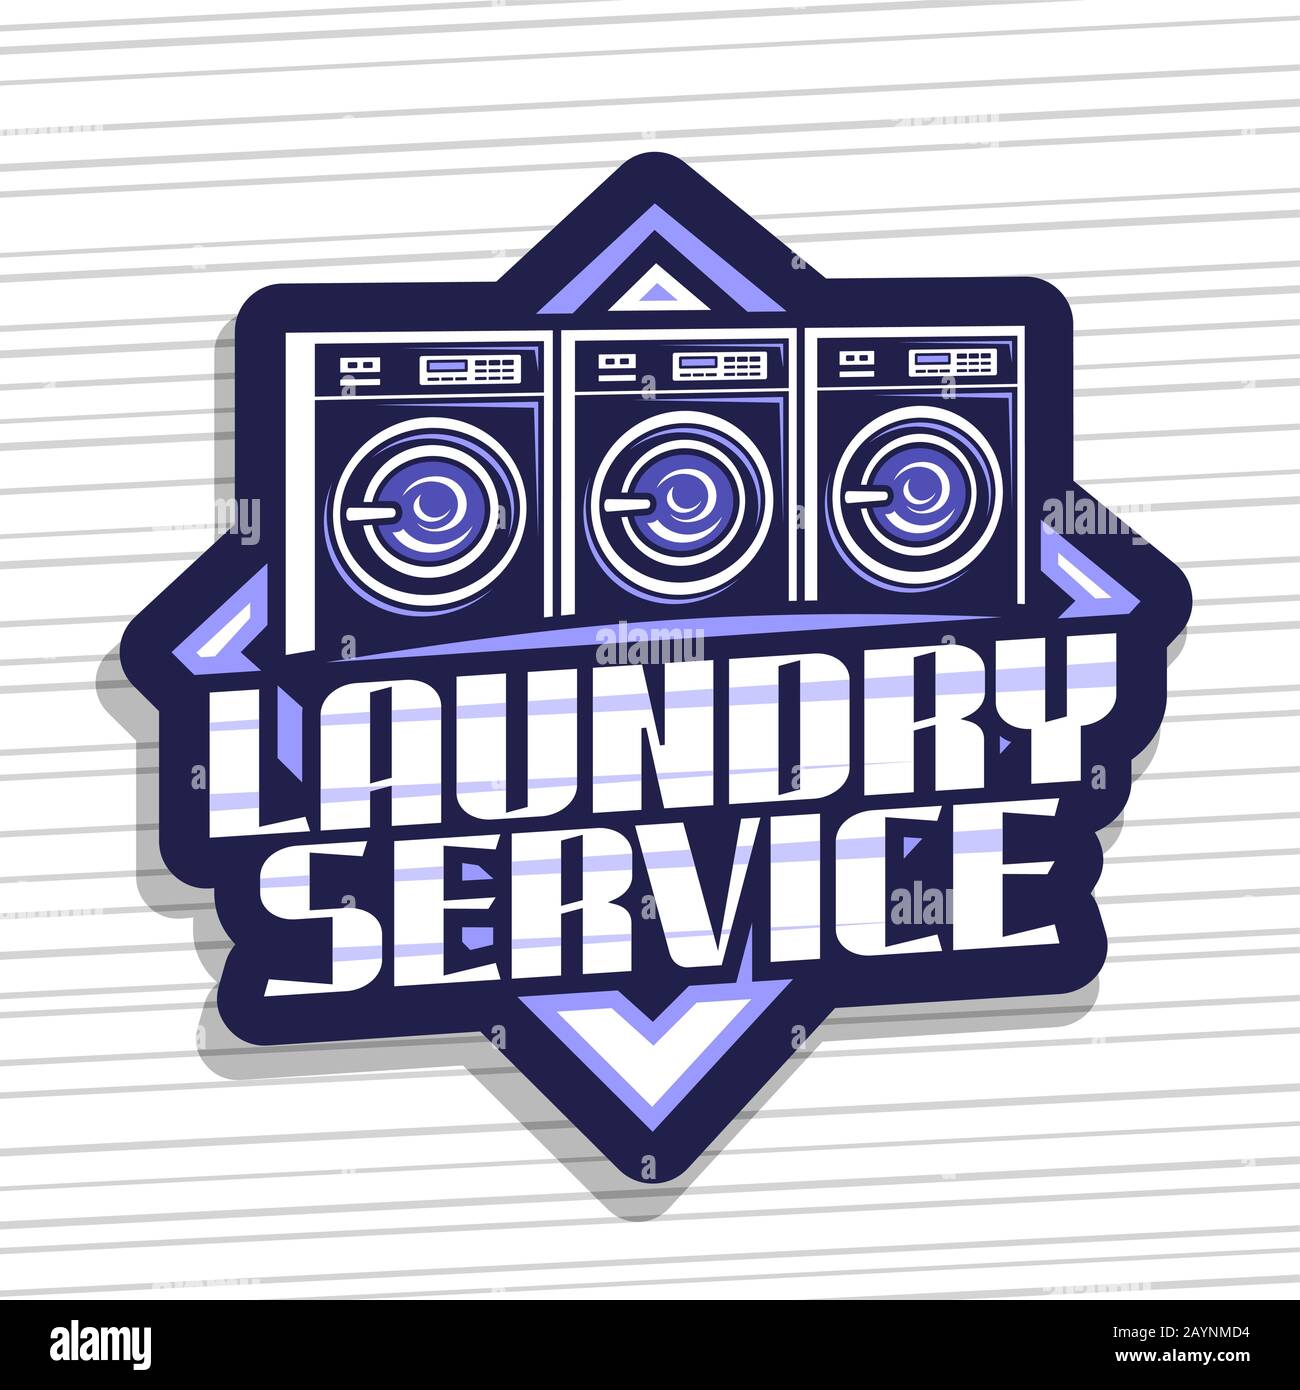 Vector logo for Laundry Service, decorative sign board with illustration of 3 automatic laundromats in a row, design concept with creative typeface fo Stock Vector